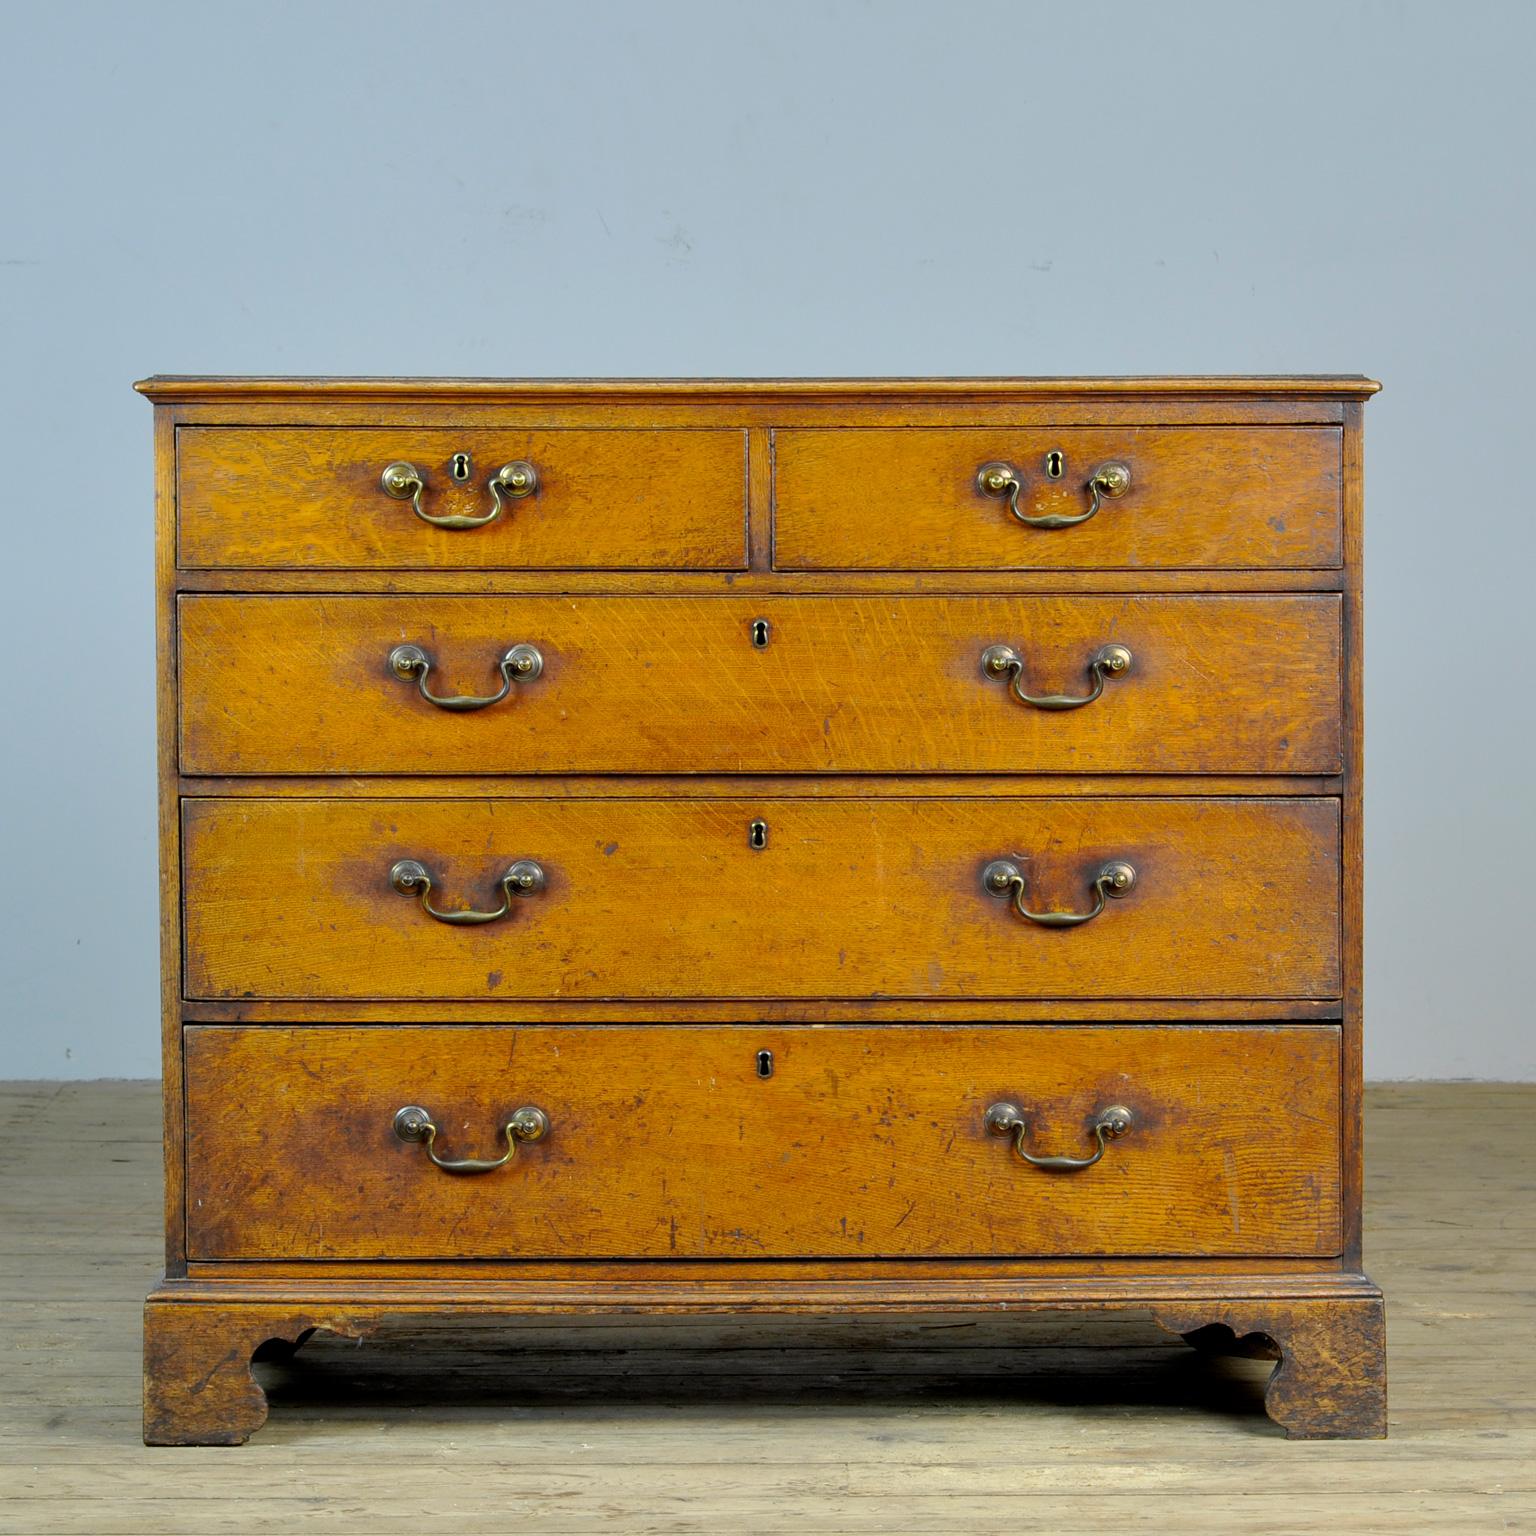 Beautiful antique oak chest of drawers from the early 19th century.
The cabinet has 5 drawers and comes from England, Georgian style.
It still has its original bronze handles (the keys are missing).